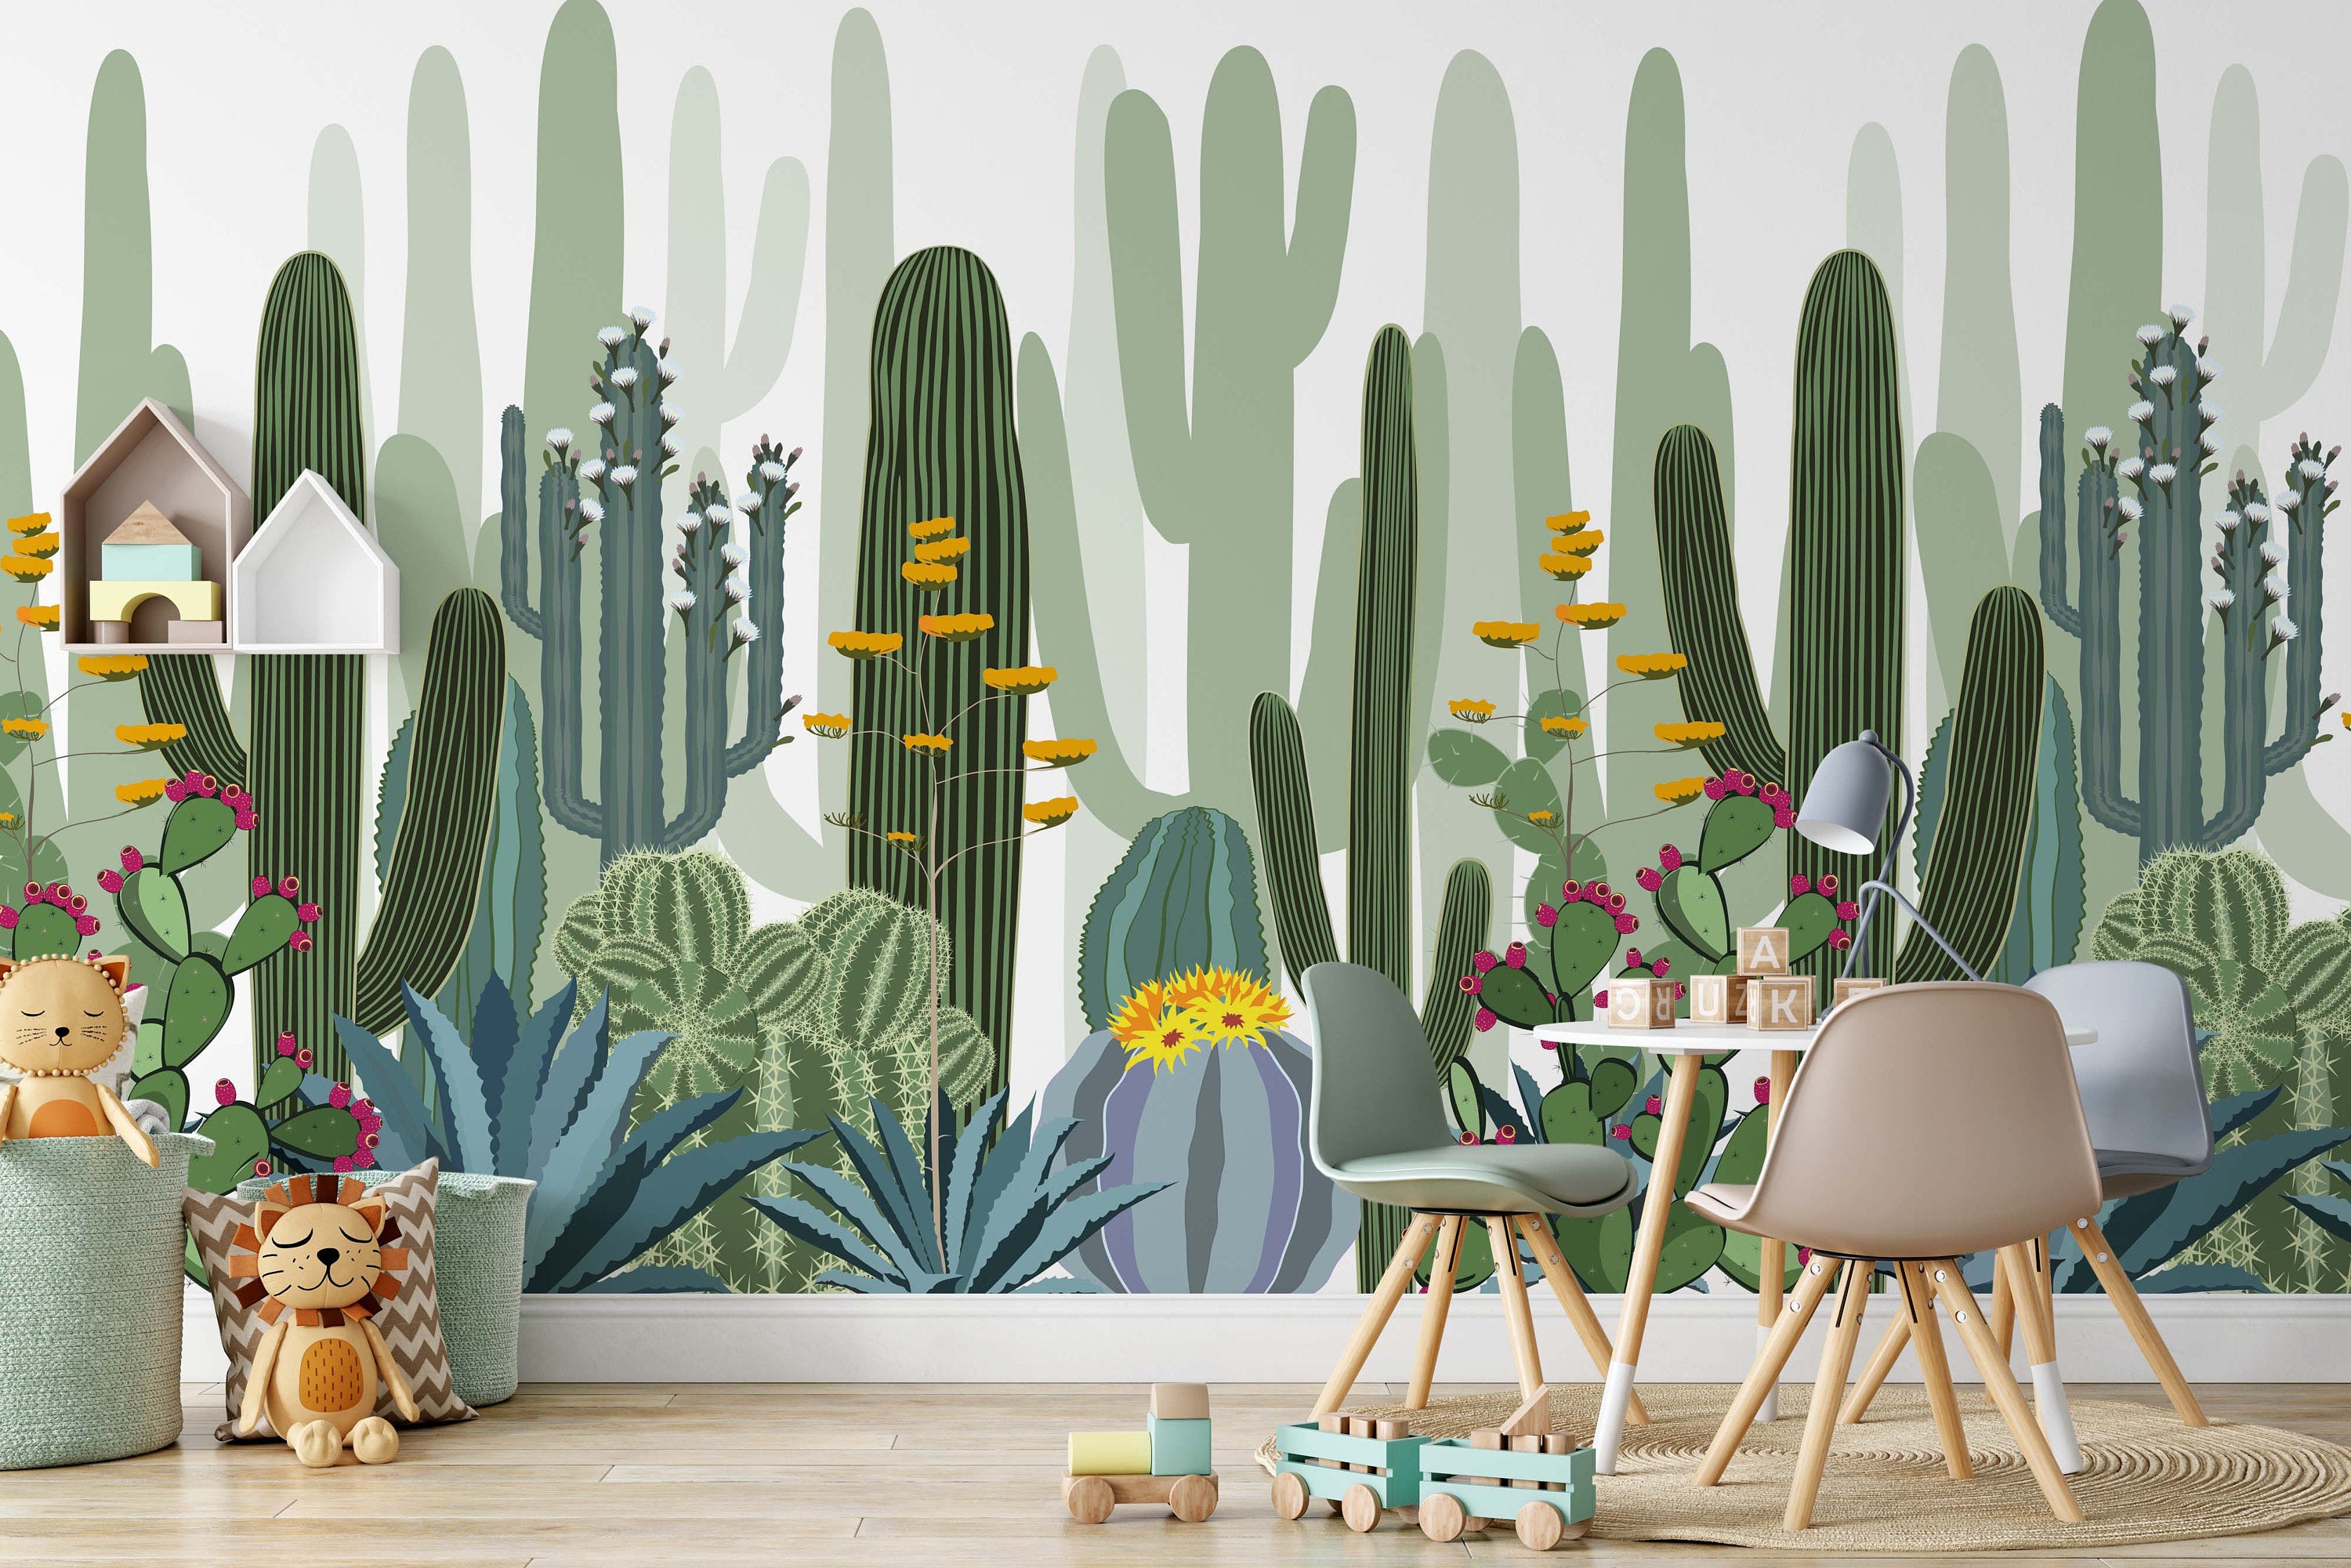 Cactuc Wild Forest Exotic Plants Wallpaper Nursery Children Kids Room Mural Home Decor Wall Art Removable